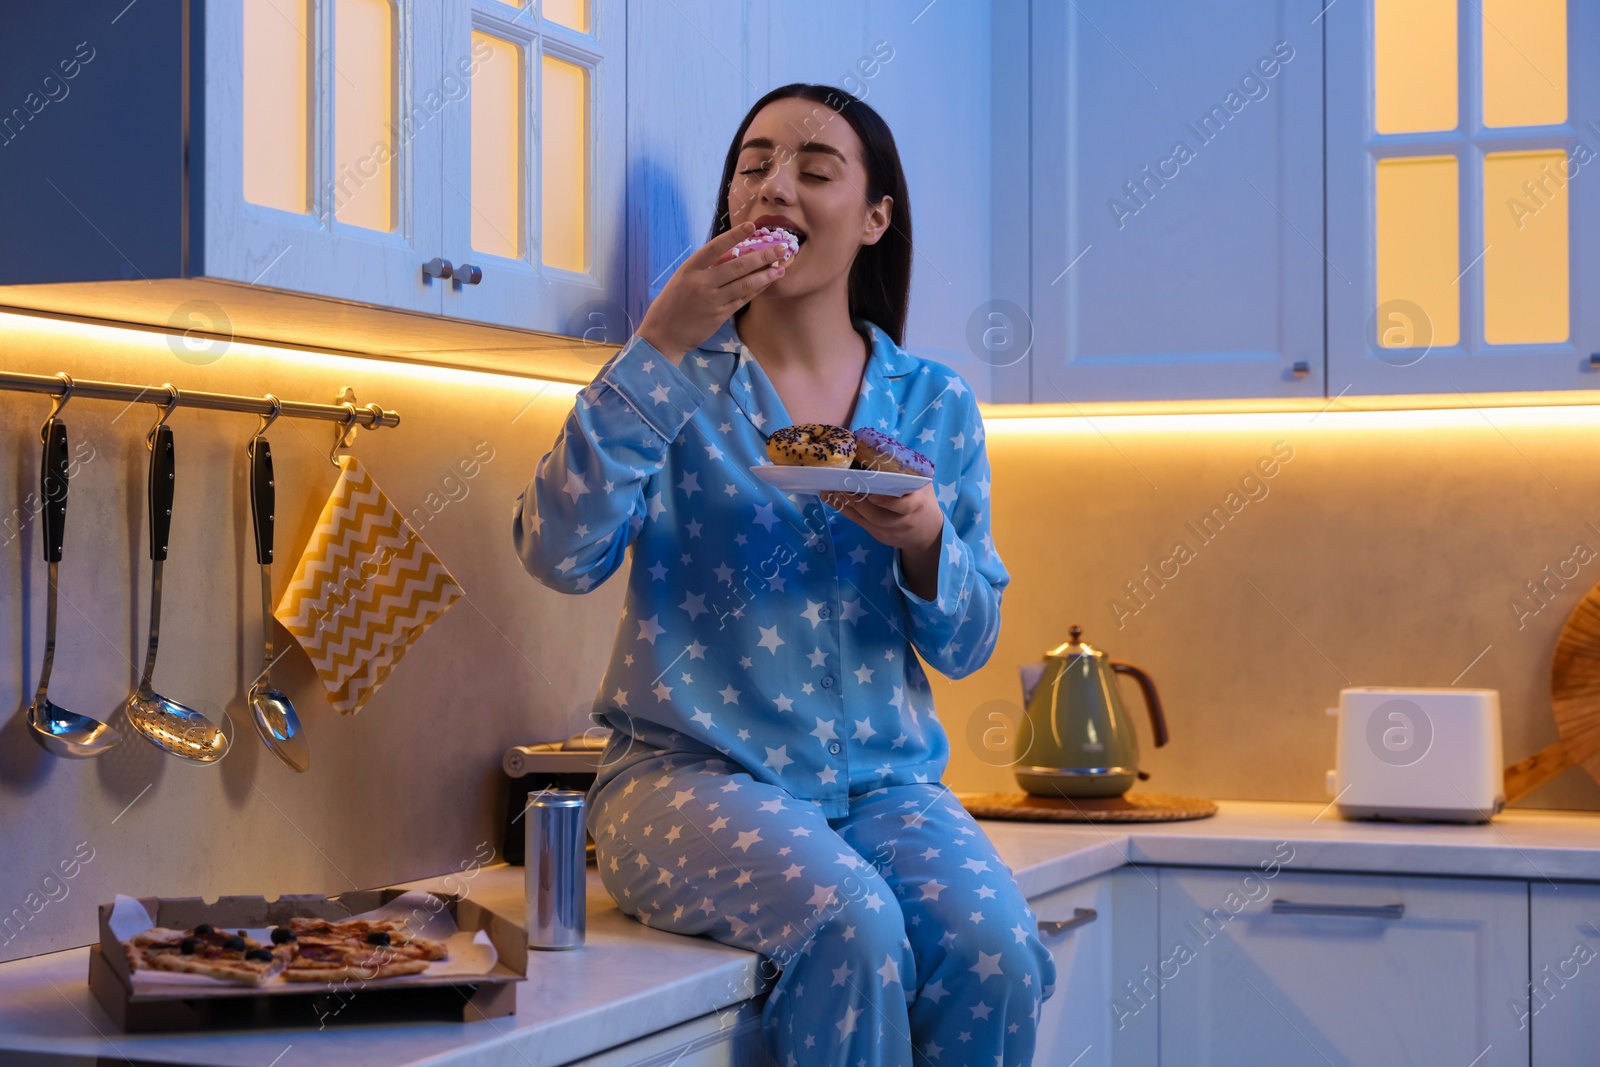 Photo of Young woman eating donut in kitchen at night. Bad habit